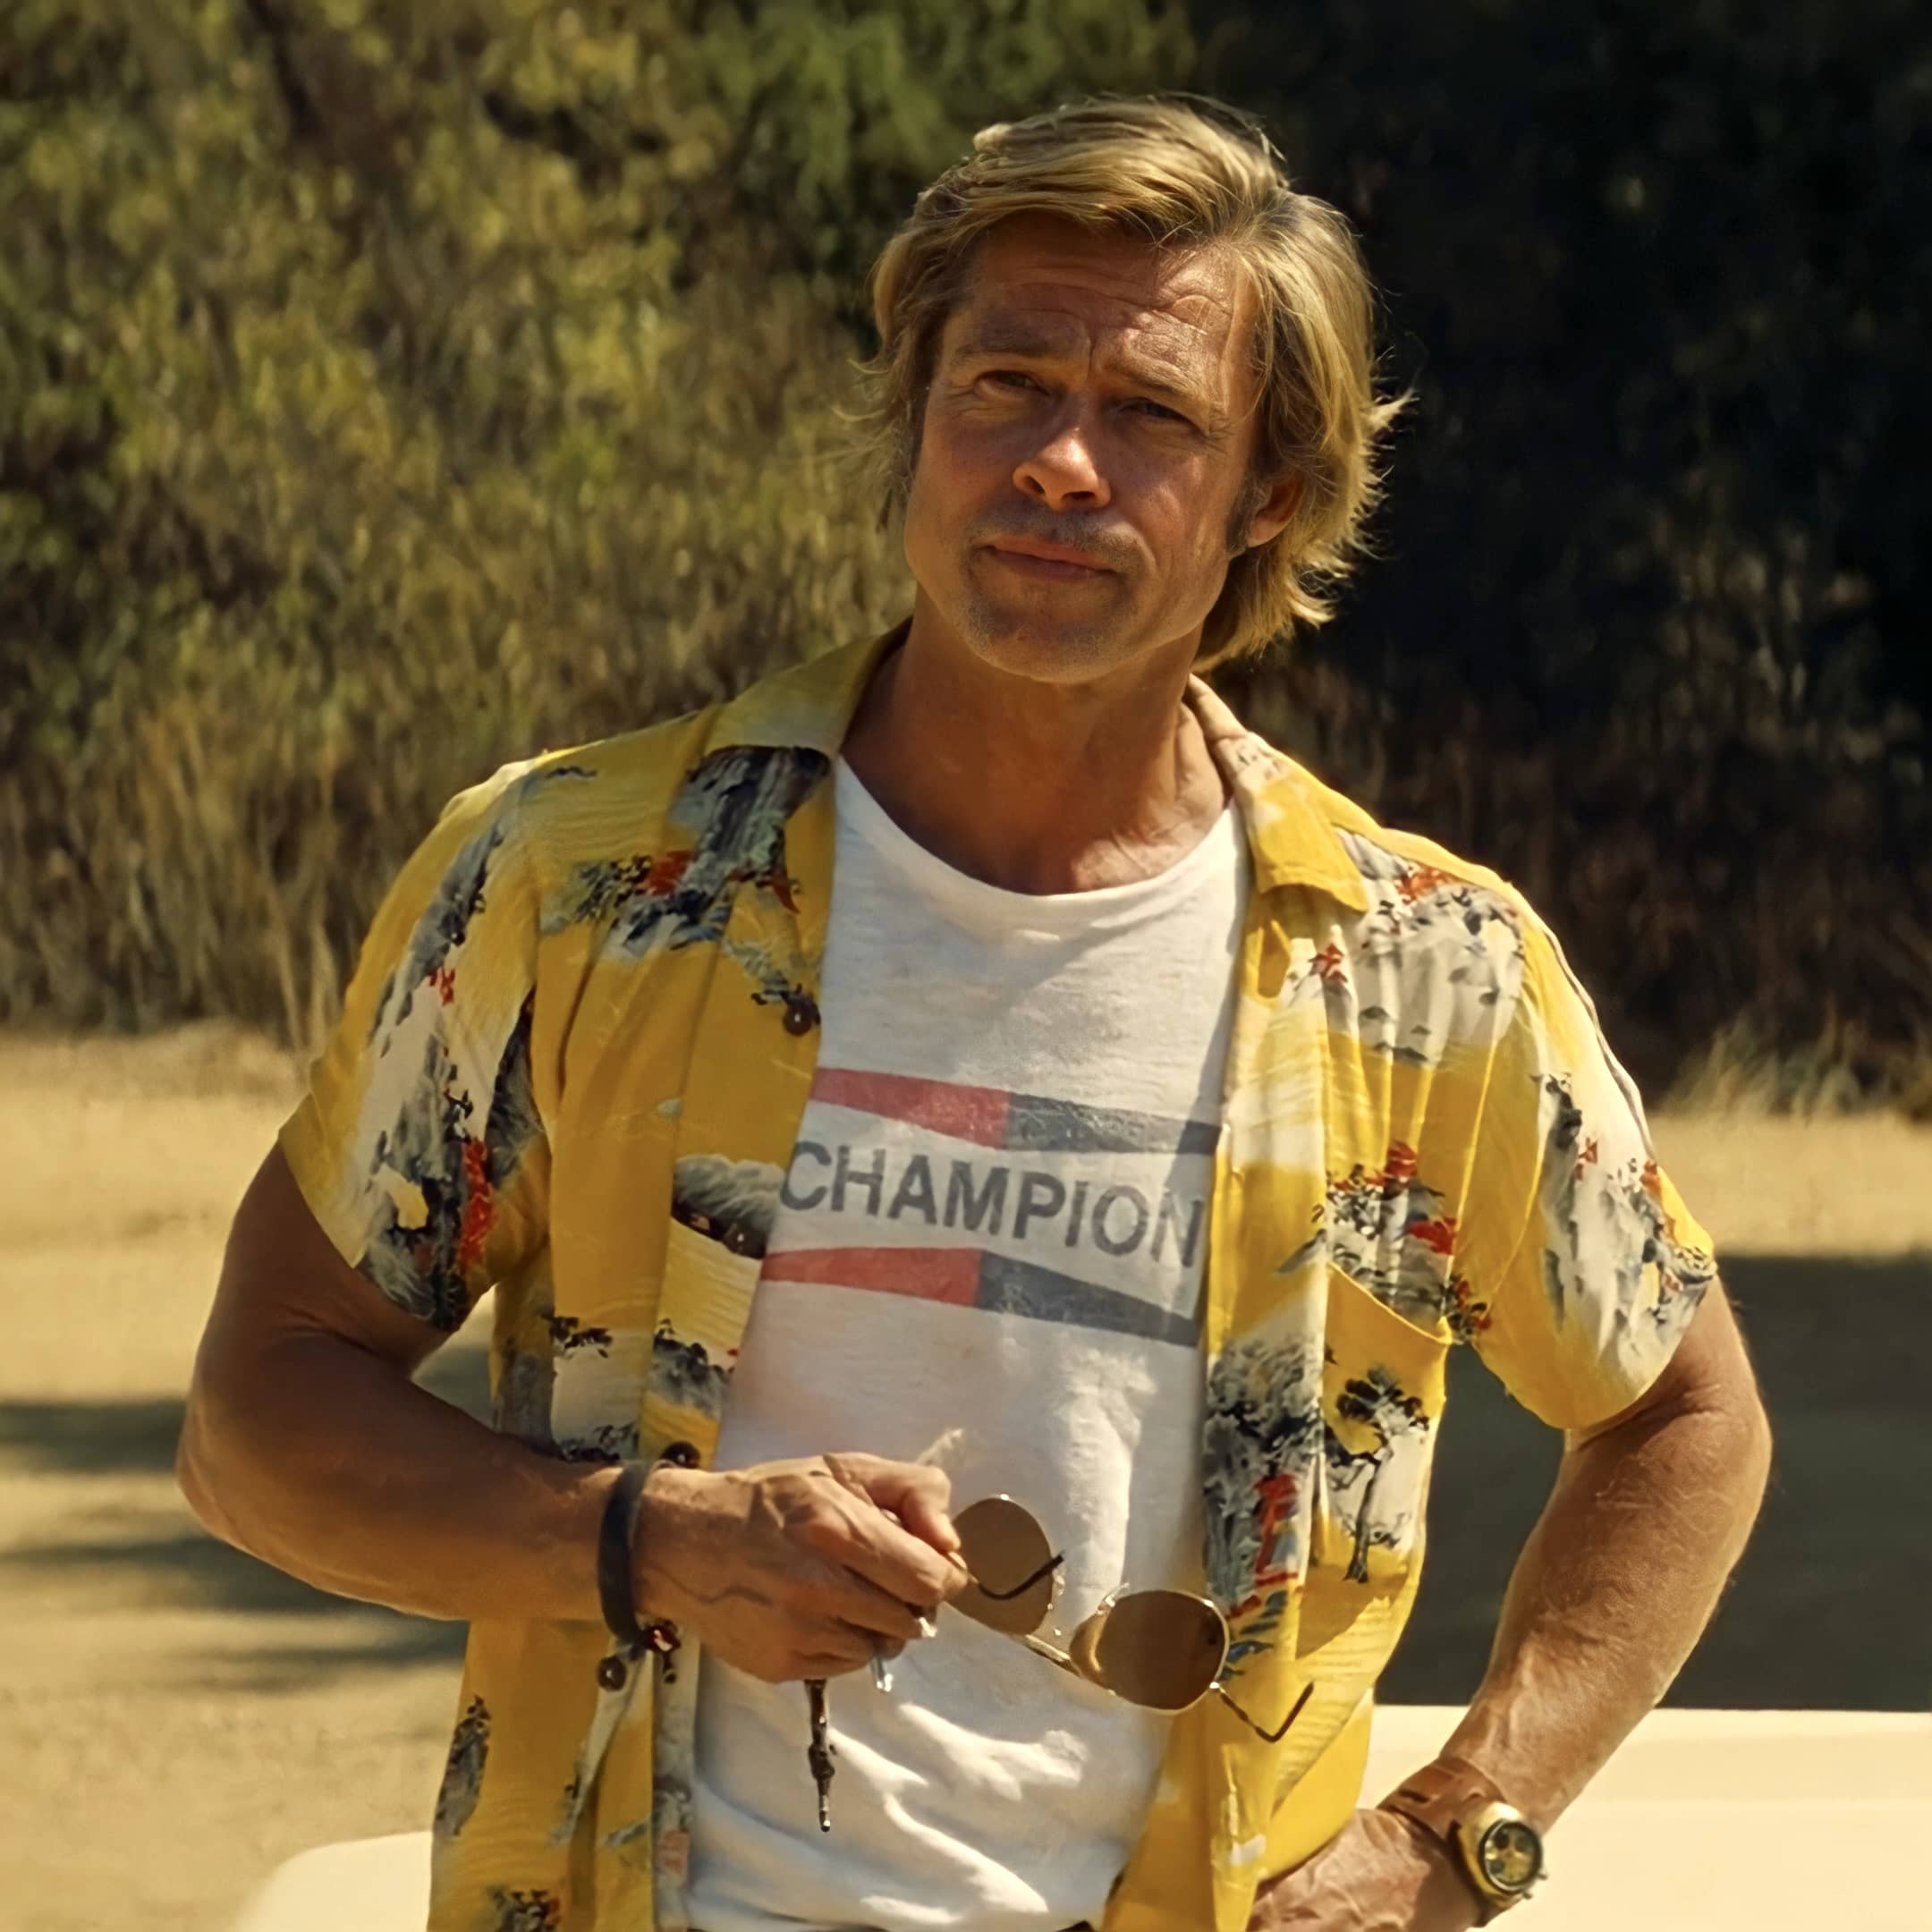 Upgrade your casual wardrobe with our exclusive Cliff Booth Champion t-shirt, perfect for fans of 'Once Upon a Time in Hollywood' and the legendary character played by Brad Pitt